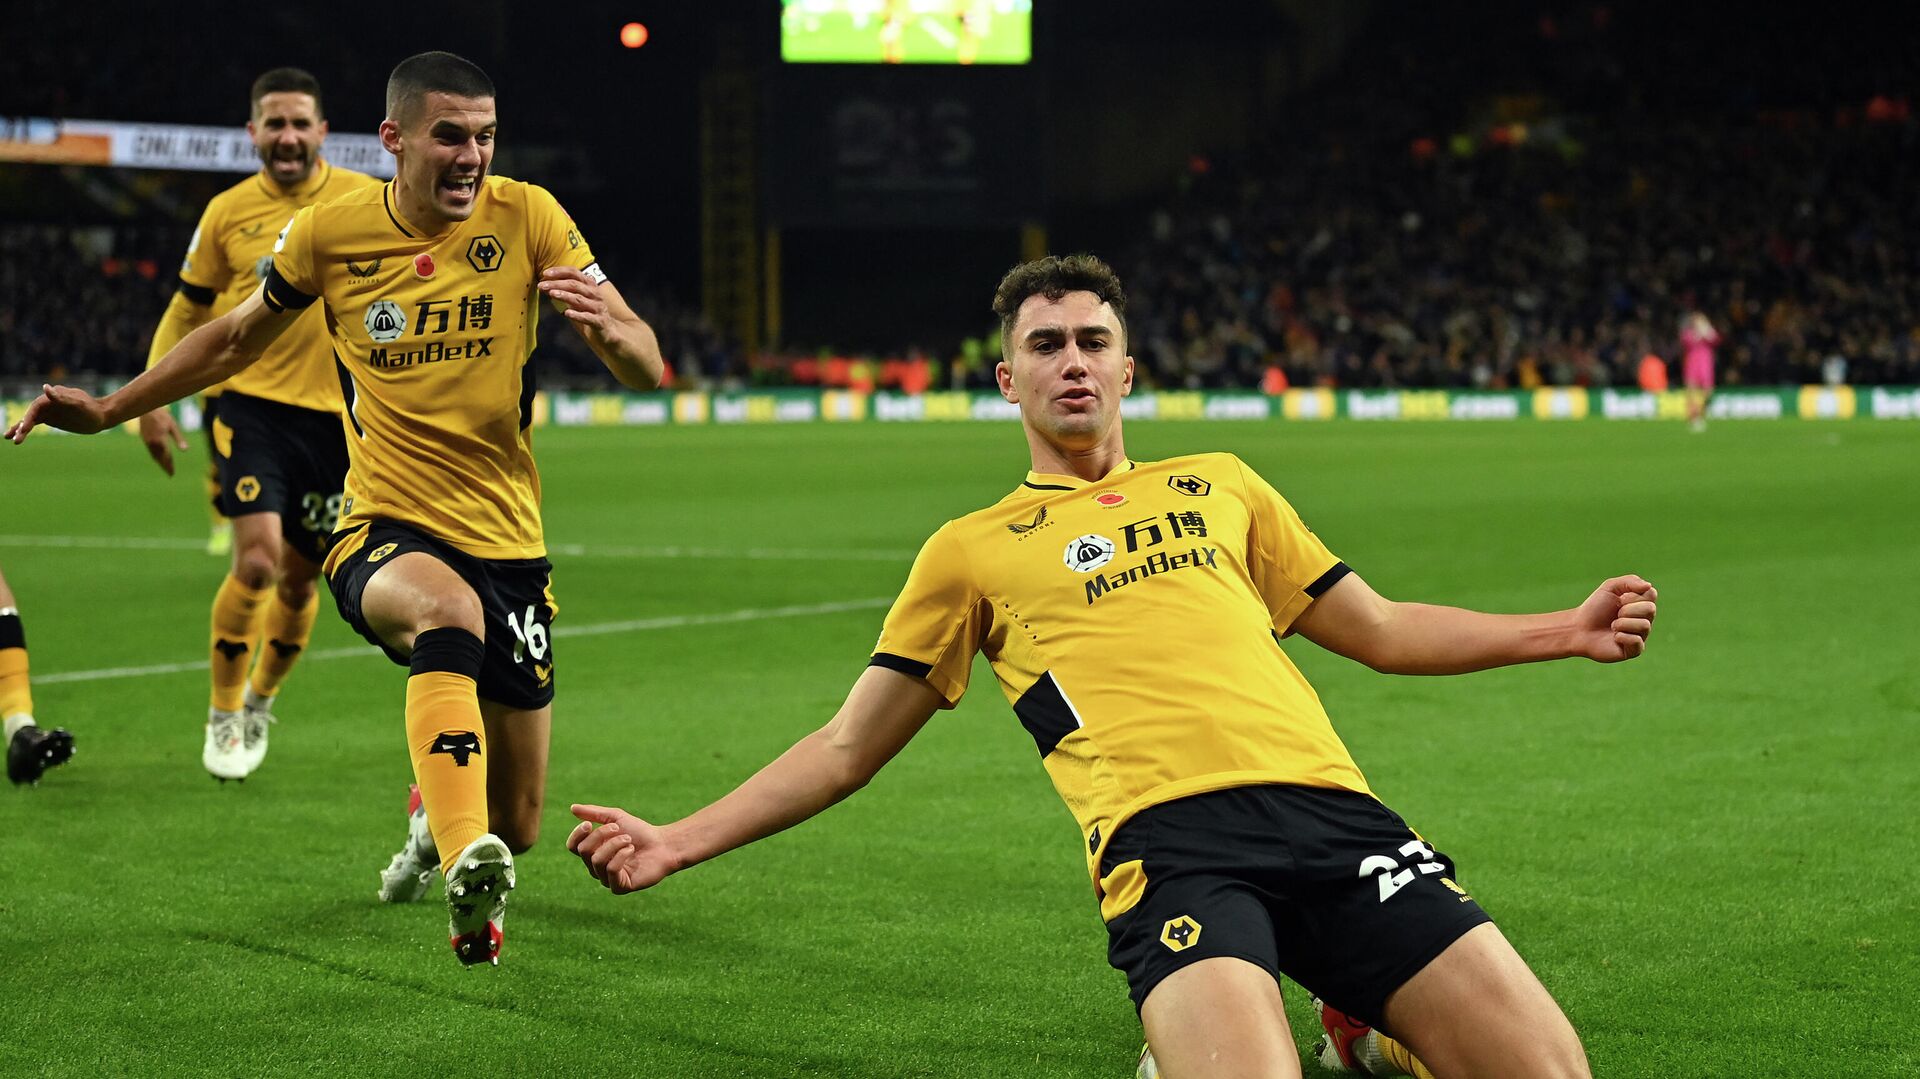 Wolverhampton Wanderers' English defender Max Kilman (R) celebrates after scoring the opening goal during the English Premier League football match between Wolverhampton Wanderers and Everton at the Molineux stadium in Wolverhampton, central England on November 1, 2021. (Photo by GLYN KIRK / AFP) / RESTRICTED TO EDITORIAL USE. No use with unauthorized audio, video, data, fixture lists, club/league logos or 'live' services. Online in-match use limited to 120 images. An additional 40 images may be used in extra time. No video emulation. Social media in-match use limited to 120 images. An additional 40 images may be used in extra time. No use in betting publications, games or single club/league/player publications. /  - РИА Новости, 1920, 05.11.2021